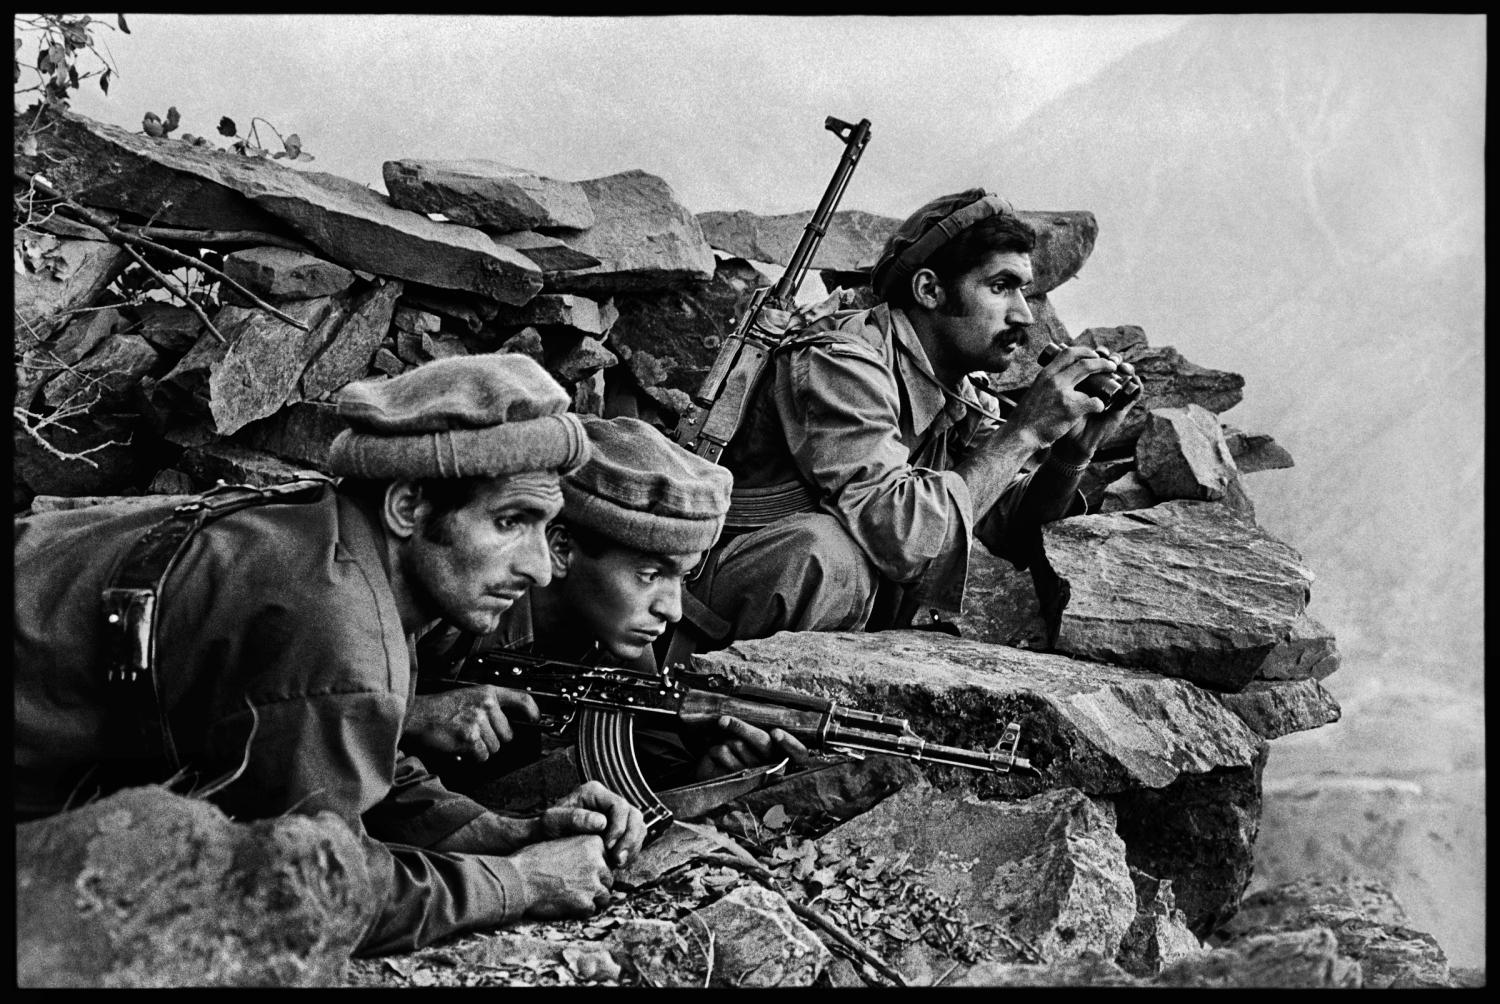 AFGHN-10260, Nuristan, Afghanistan, 1979.  CAPTION:  Mujahideen Watch a Russian Convoy. Nuristan, Afghanistan,1979. Mujahideen fighters watch convoy, 1979"After this photograph was published in The New York Times (in a vertical format), McCurry's career took off. Its publication identified McCurry as a photographer with inside knowledge and contacts as the conflict between the Soviet Union and Afghan nationals expanded. The image also heralded the photographer's intense, poetic approach to telling stories with an economy of means, strategically employing composition, light, and space as narrative tools. Here, for instance, the story is more powerfully told without seeing the Russian convoy the Mujahadeen fighters are so intensely observing, leaving the threat of their presence in mist outside the frame." - Phaidon 55 Mujahideen observe a Russian convoy, Nuristan, Afghanistan, 1979. Pg 16,17, Untold: The Stories Behind the Photographs Magnum Photos, NYC21021, MCS1980002 W00052/00A Steve Mccurry_Book Untold_Book final print_Beetles and Huxley MAX PRINT SIZE: 40X60 retouched_Sonny Fabbri 10/13/2015